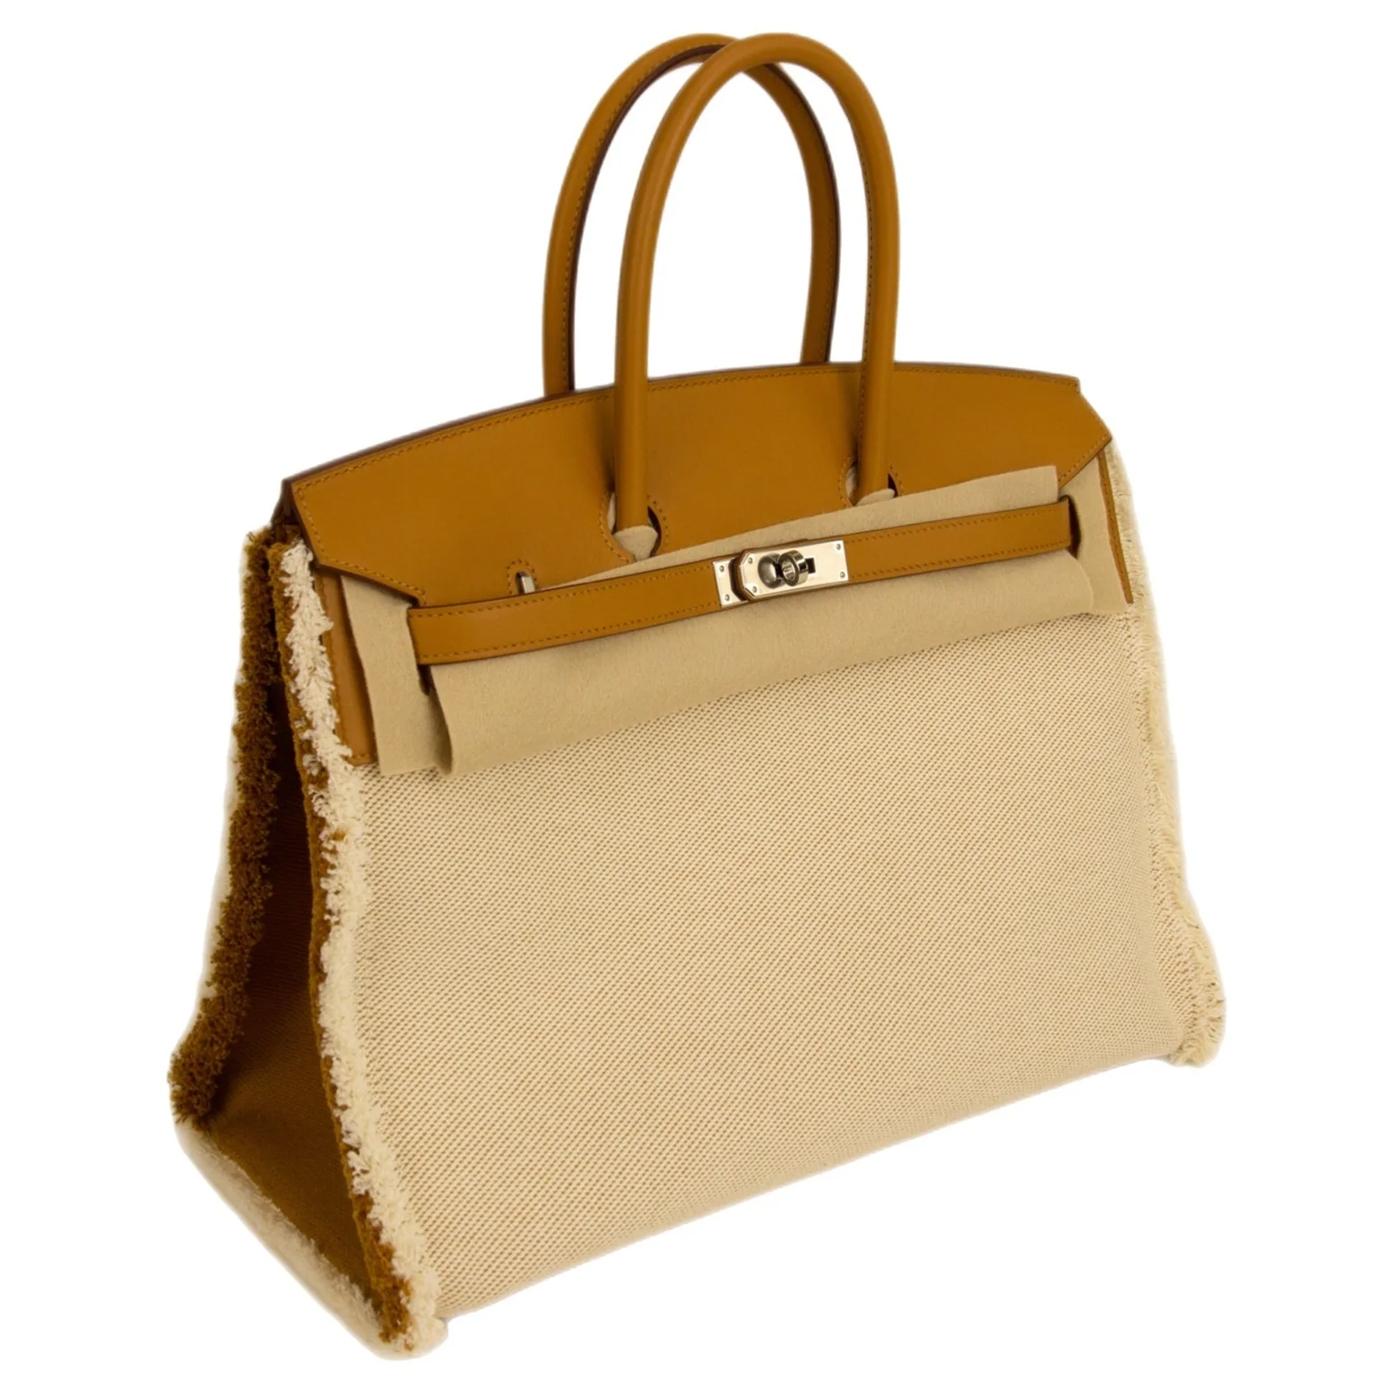 The Birkin Bag is a women's handbag from the luxury fashion brand Hermès that has been handcrafted since 1984 and is named after the actress Jane Birkin. The bag, like the Kelly Bag, was also designed by Hermès in the 1930s, A classic of fashion